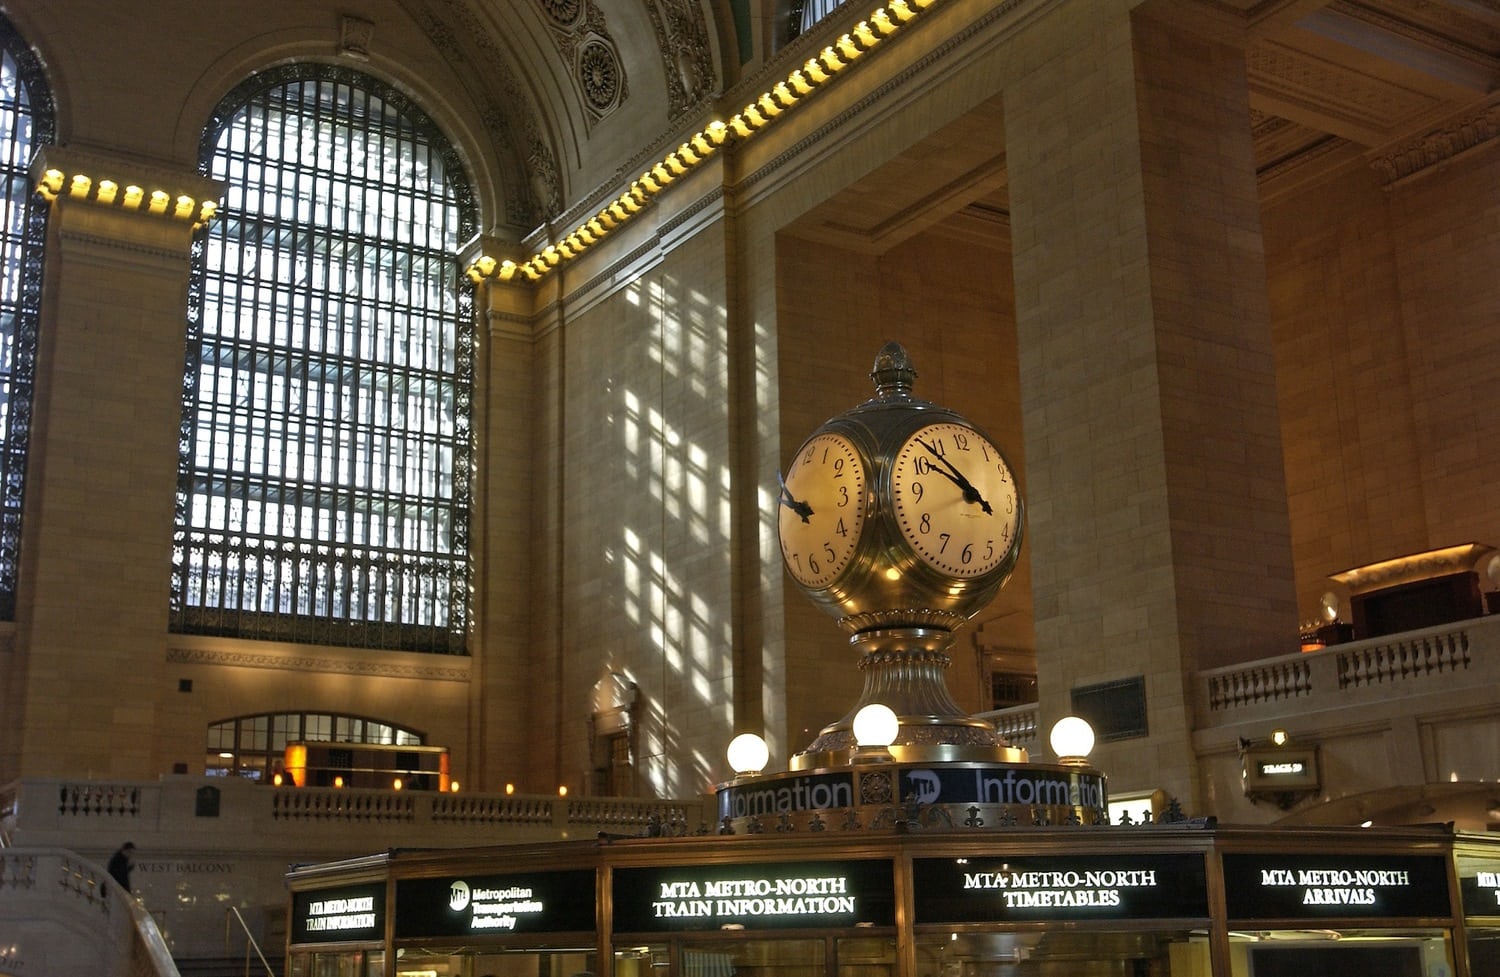 Grand Central Station in New York celebrates centennial